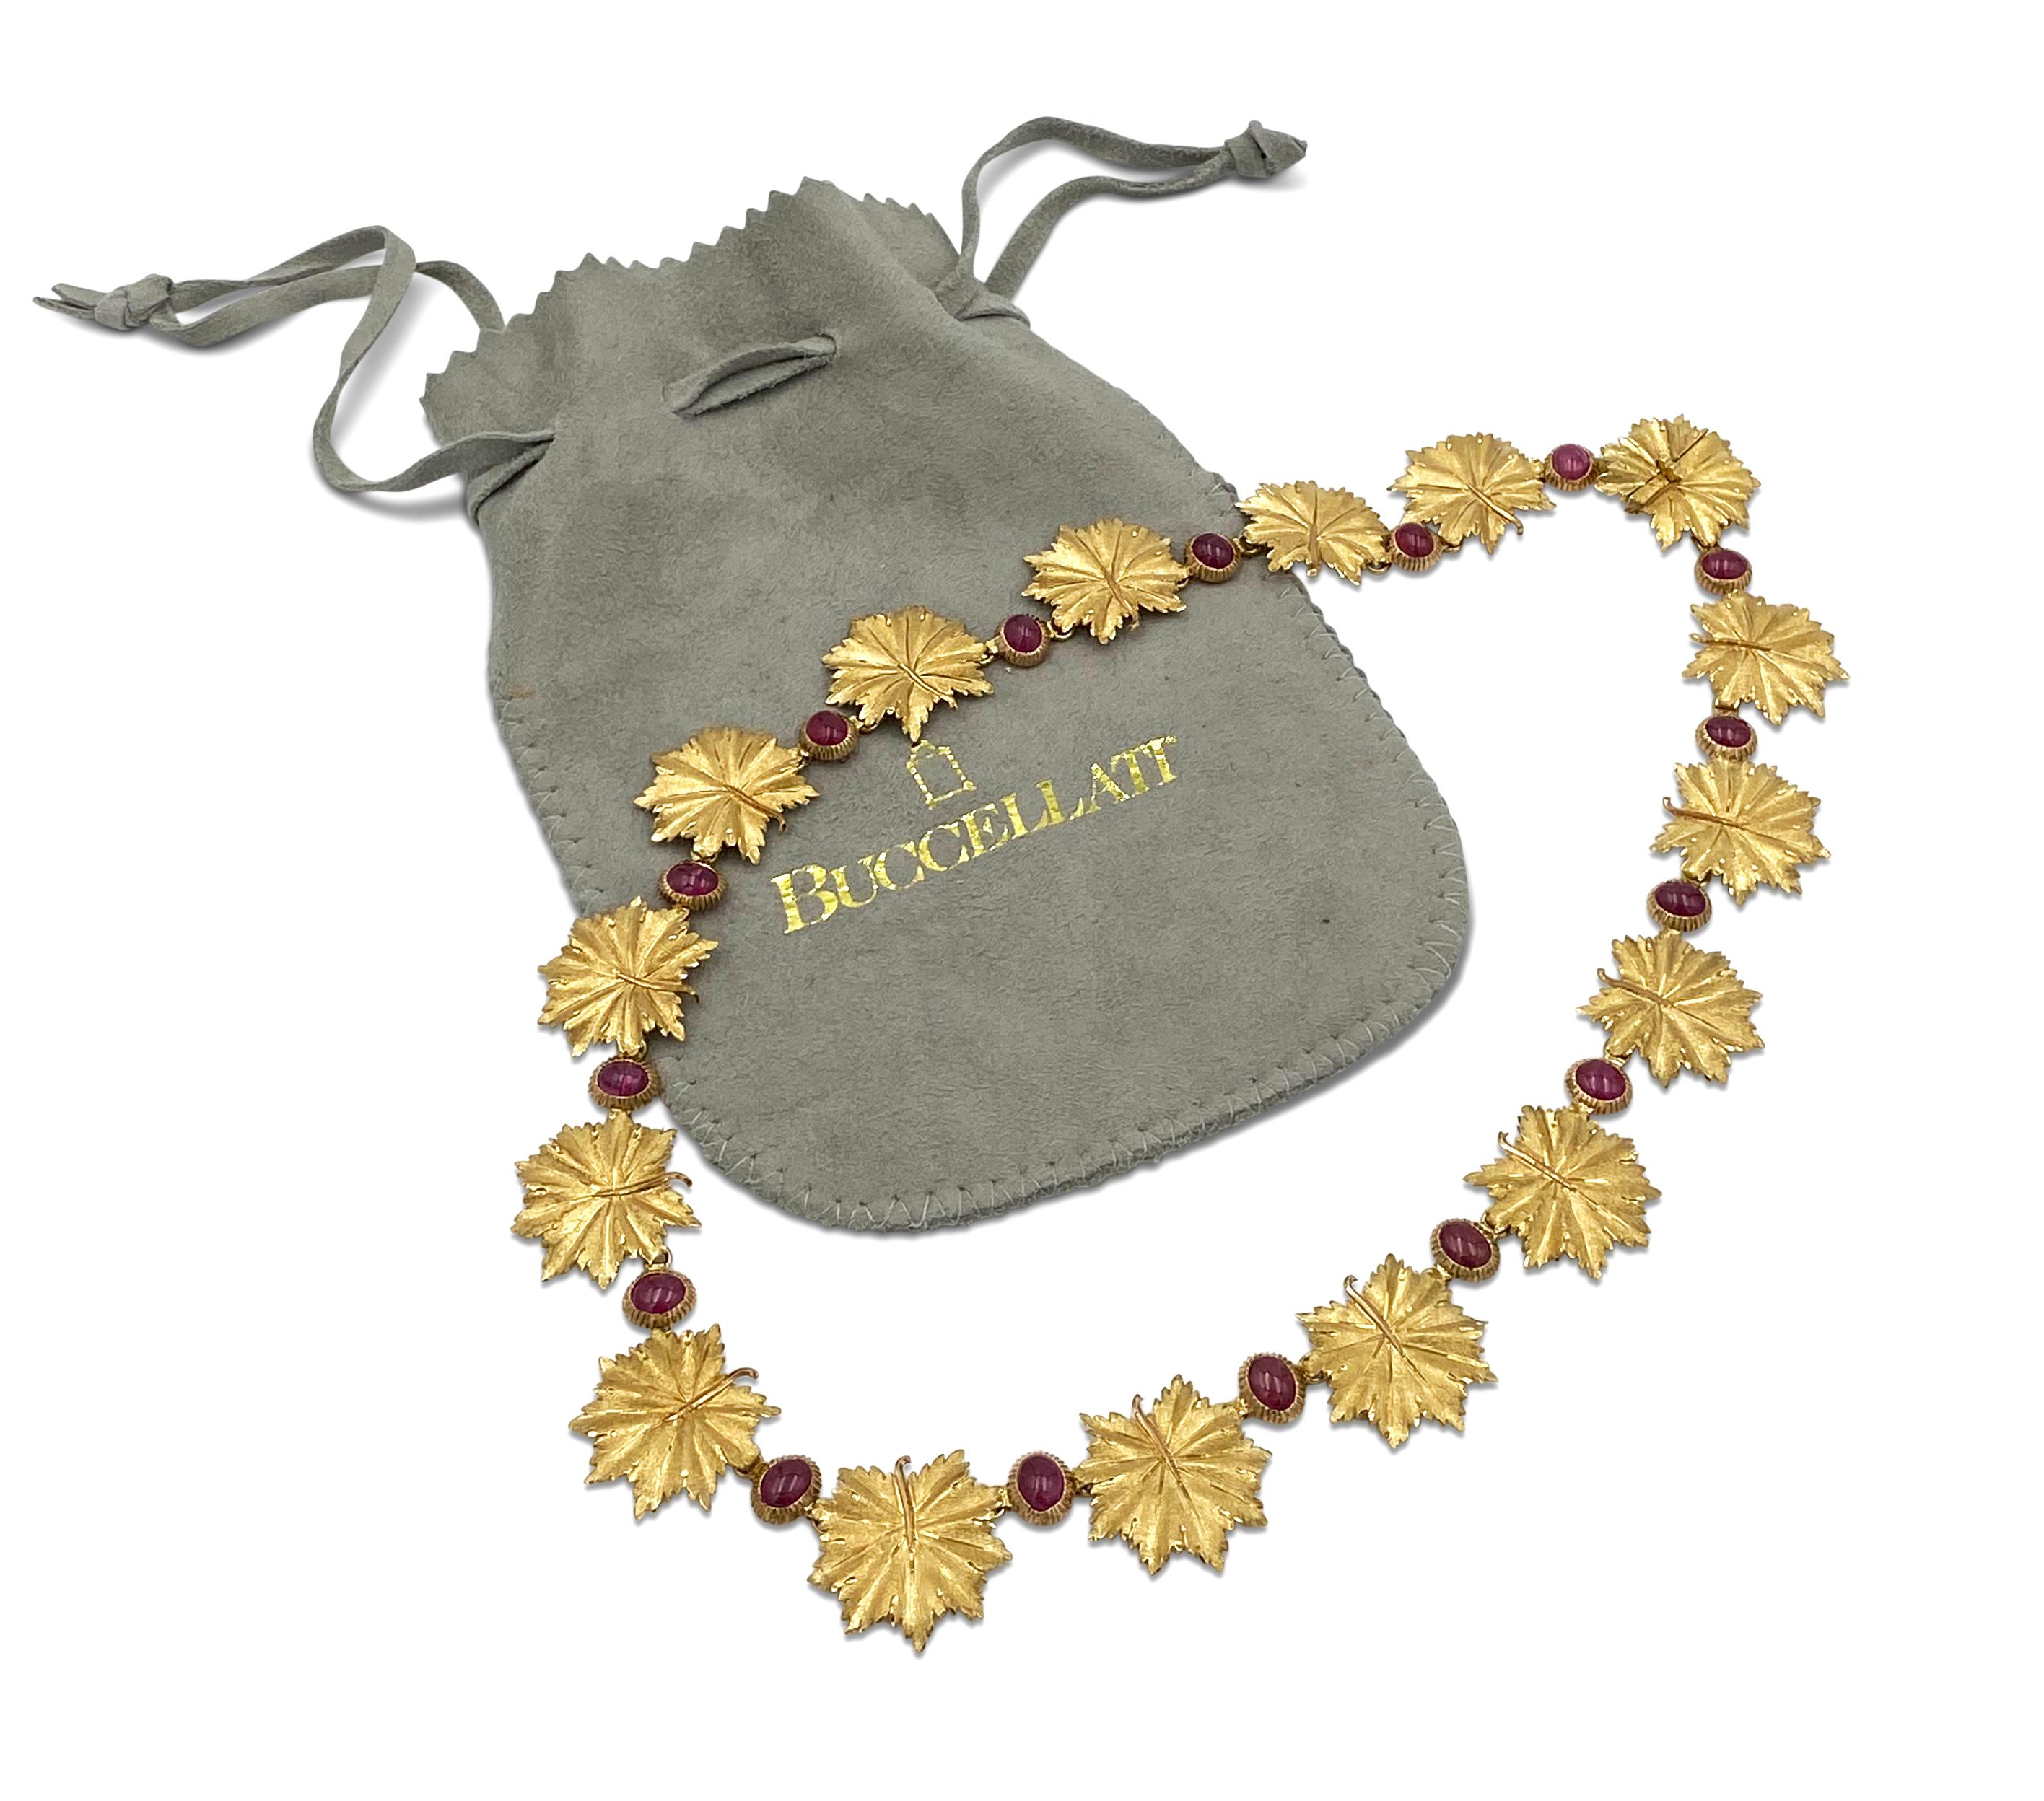 Authentic Buccellati 18 karat yellow gold leaf motif necklace set with 16 cabochon ruby stones weighing approximately 9.5 carats. Signed Buccellati, Italy 18K. The necklace is 15 1/2 inches in length. Necklace comes with original pouch. CIRCA 2010s.